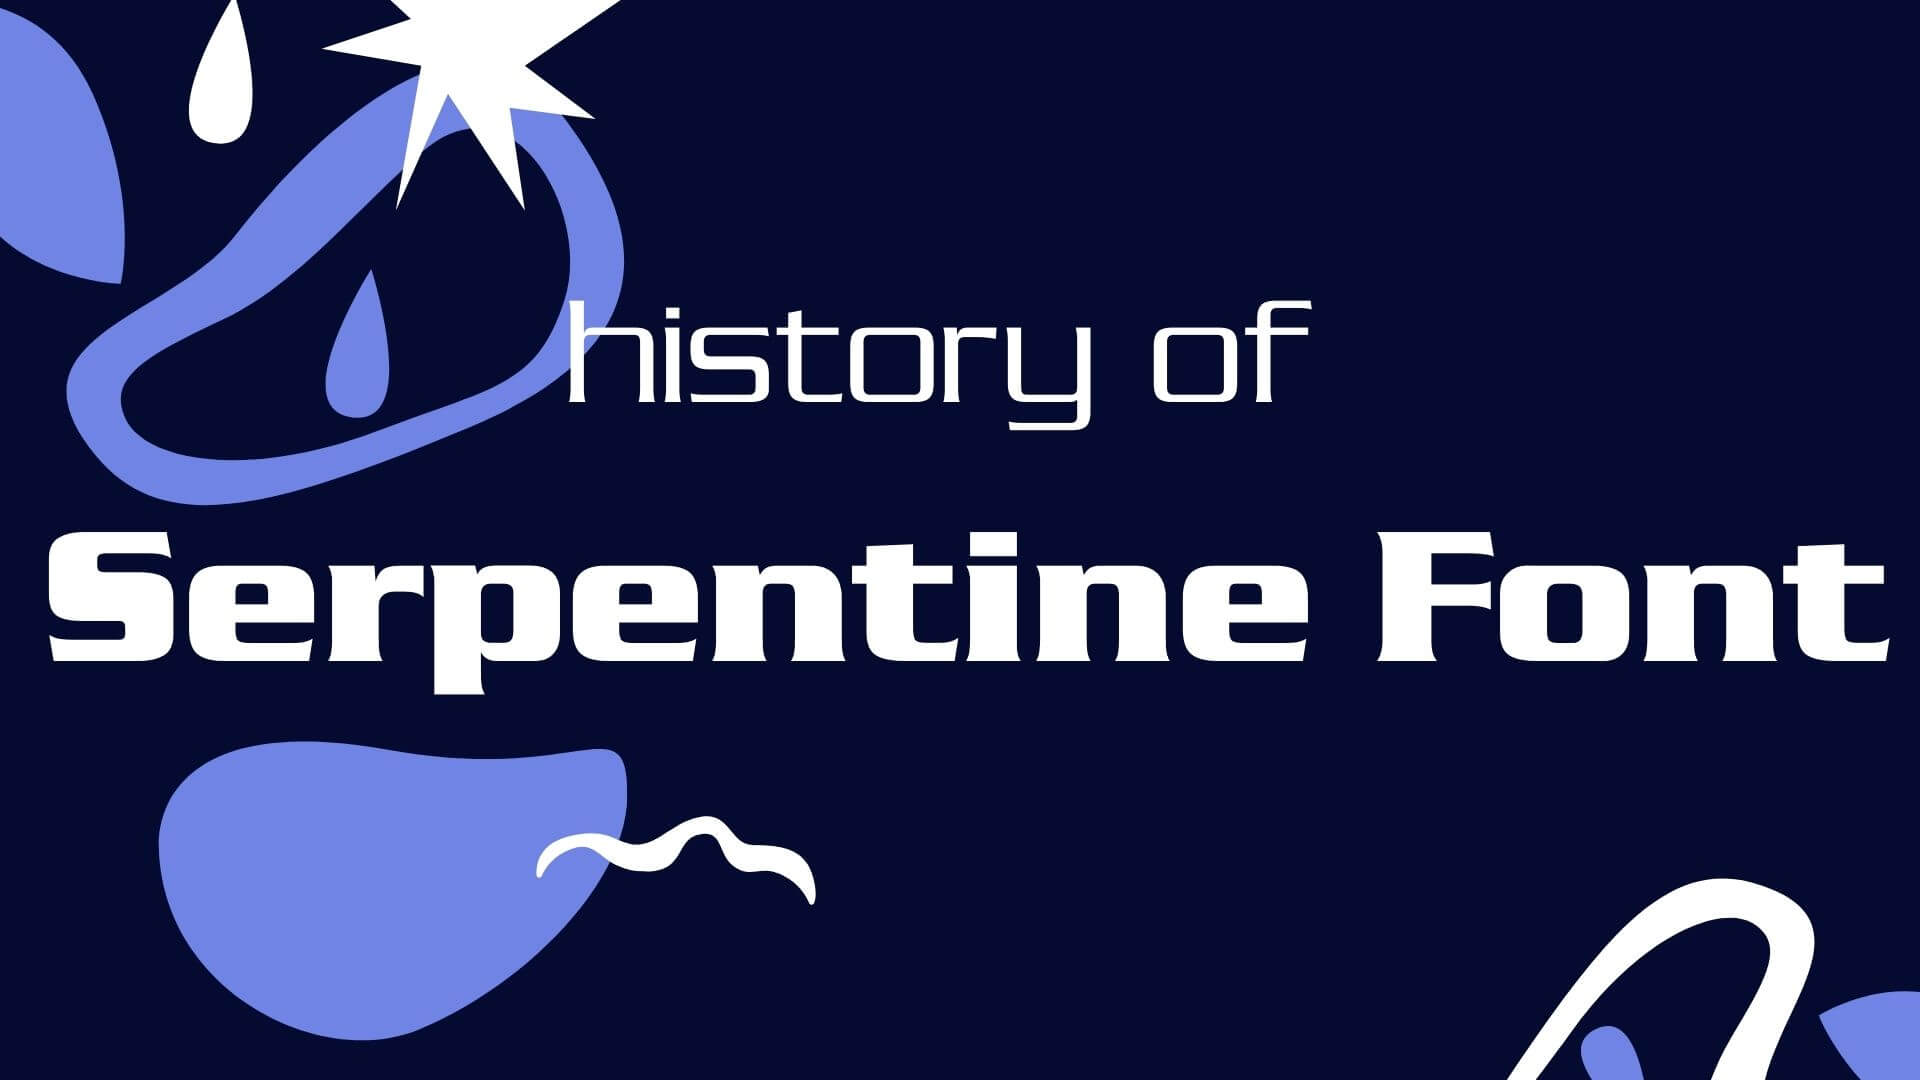 History of Serpentine Font